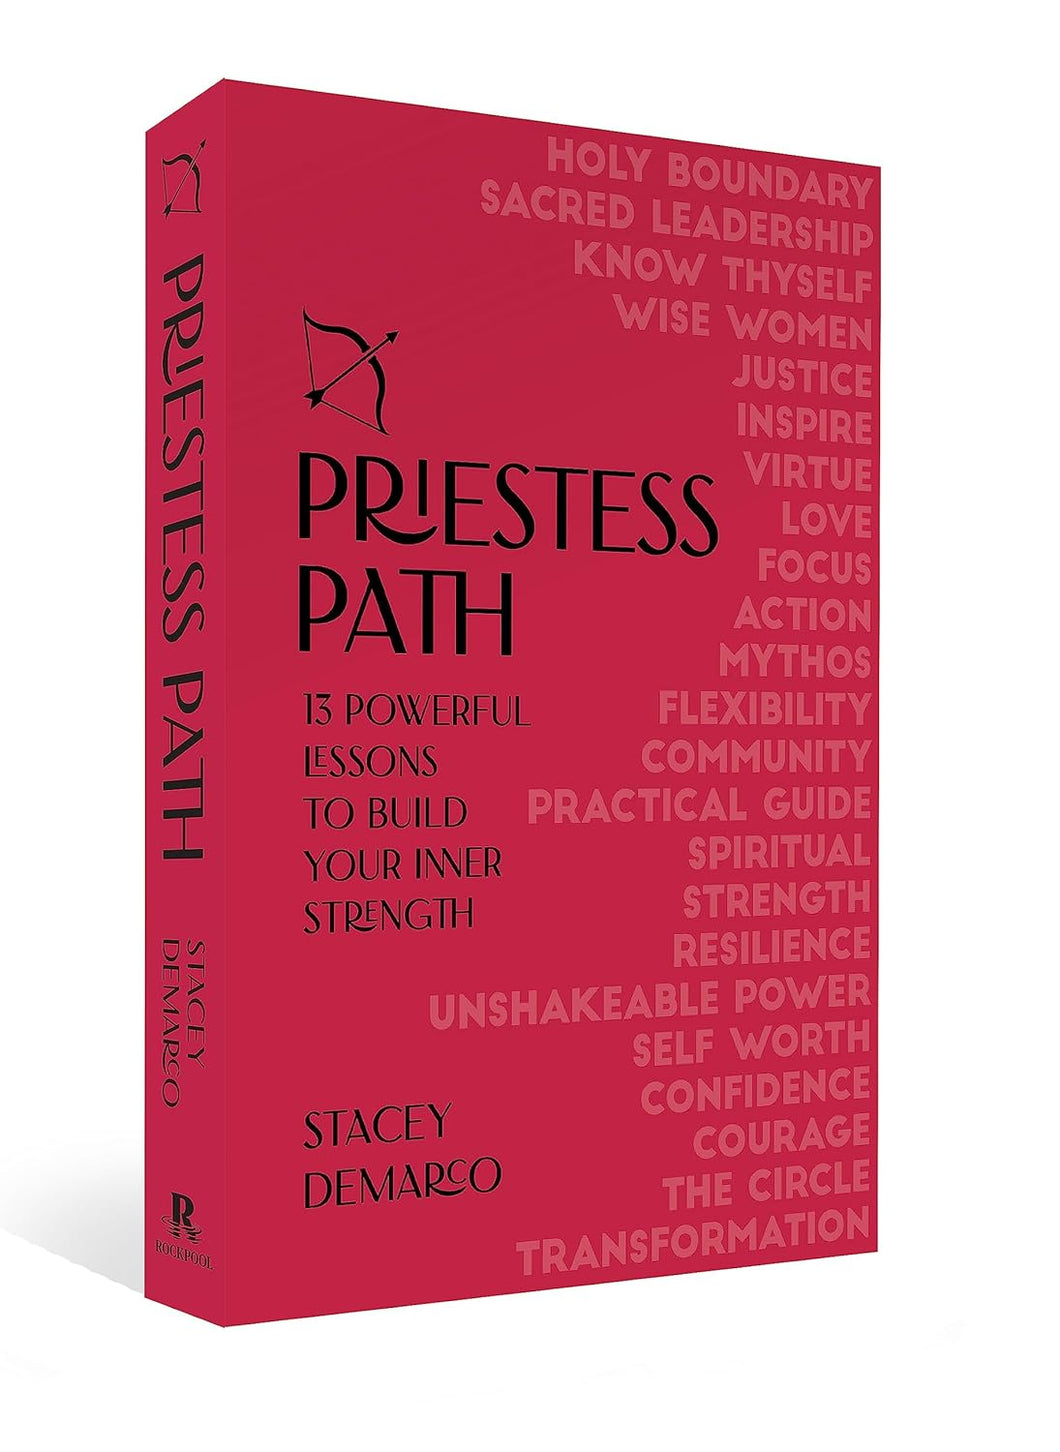 Priestess Path: 13 Powerful Lessons to Build Your Inner Strength